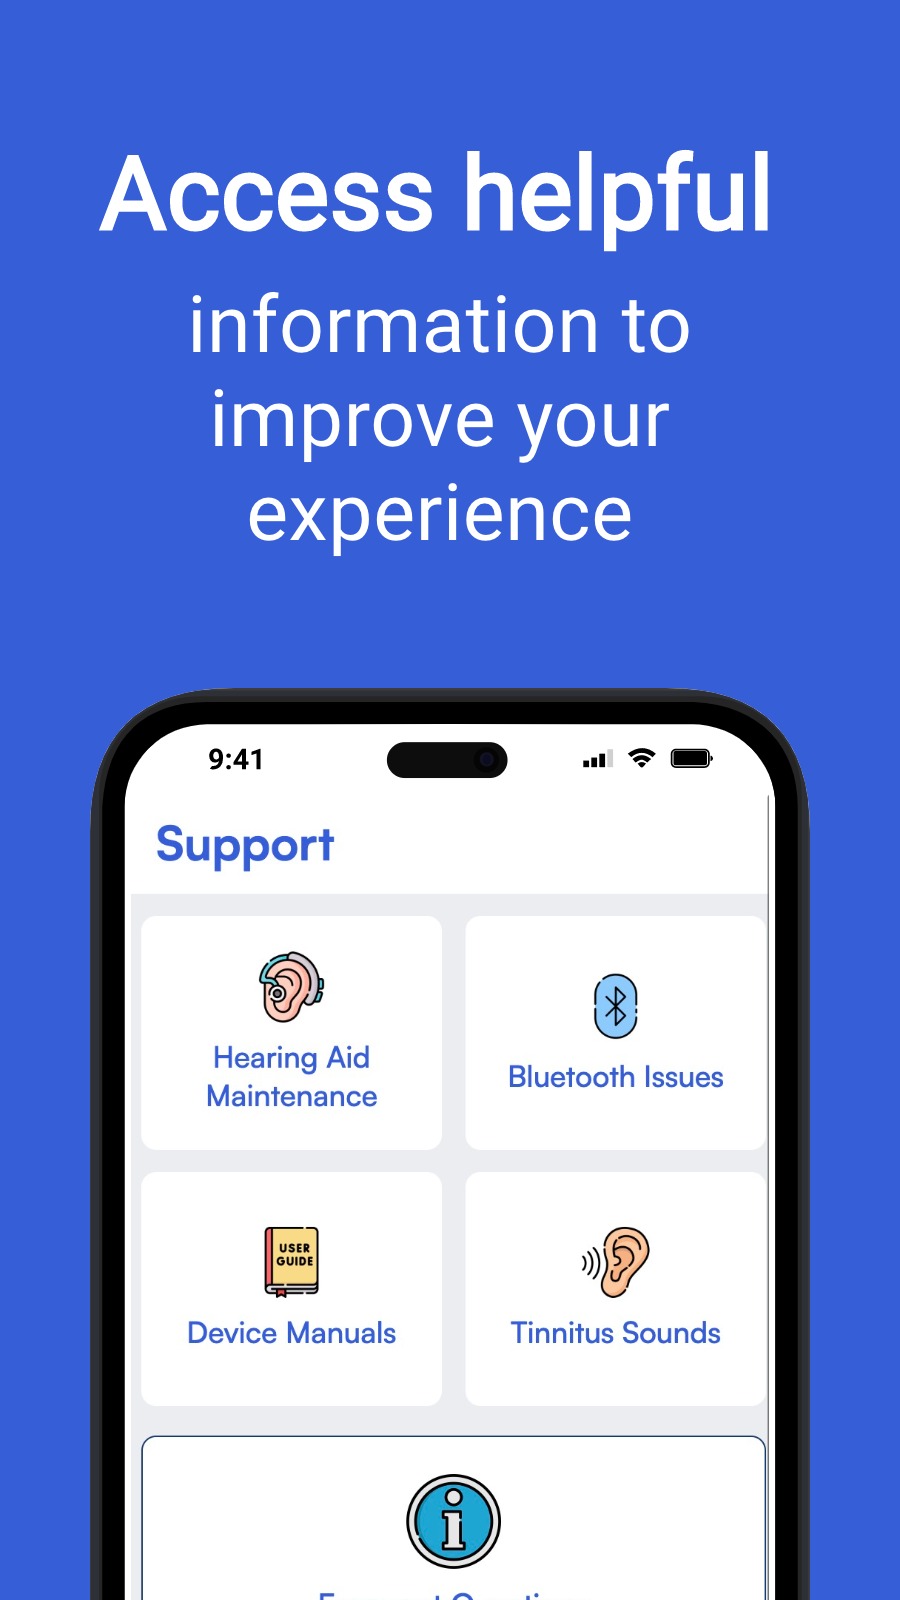 Access helpful - information to improve your experience